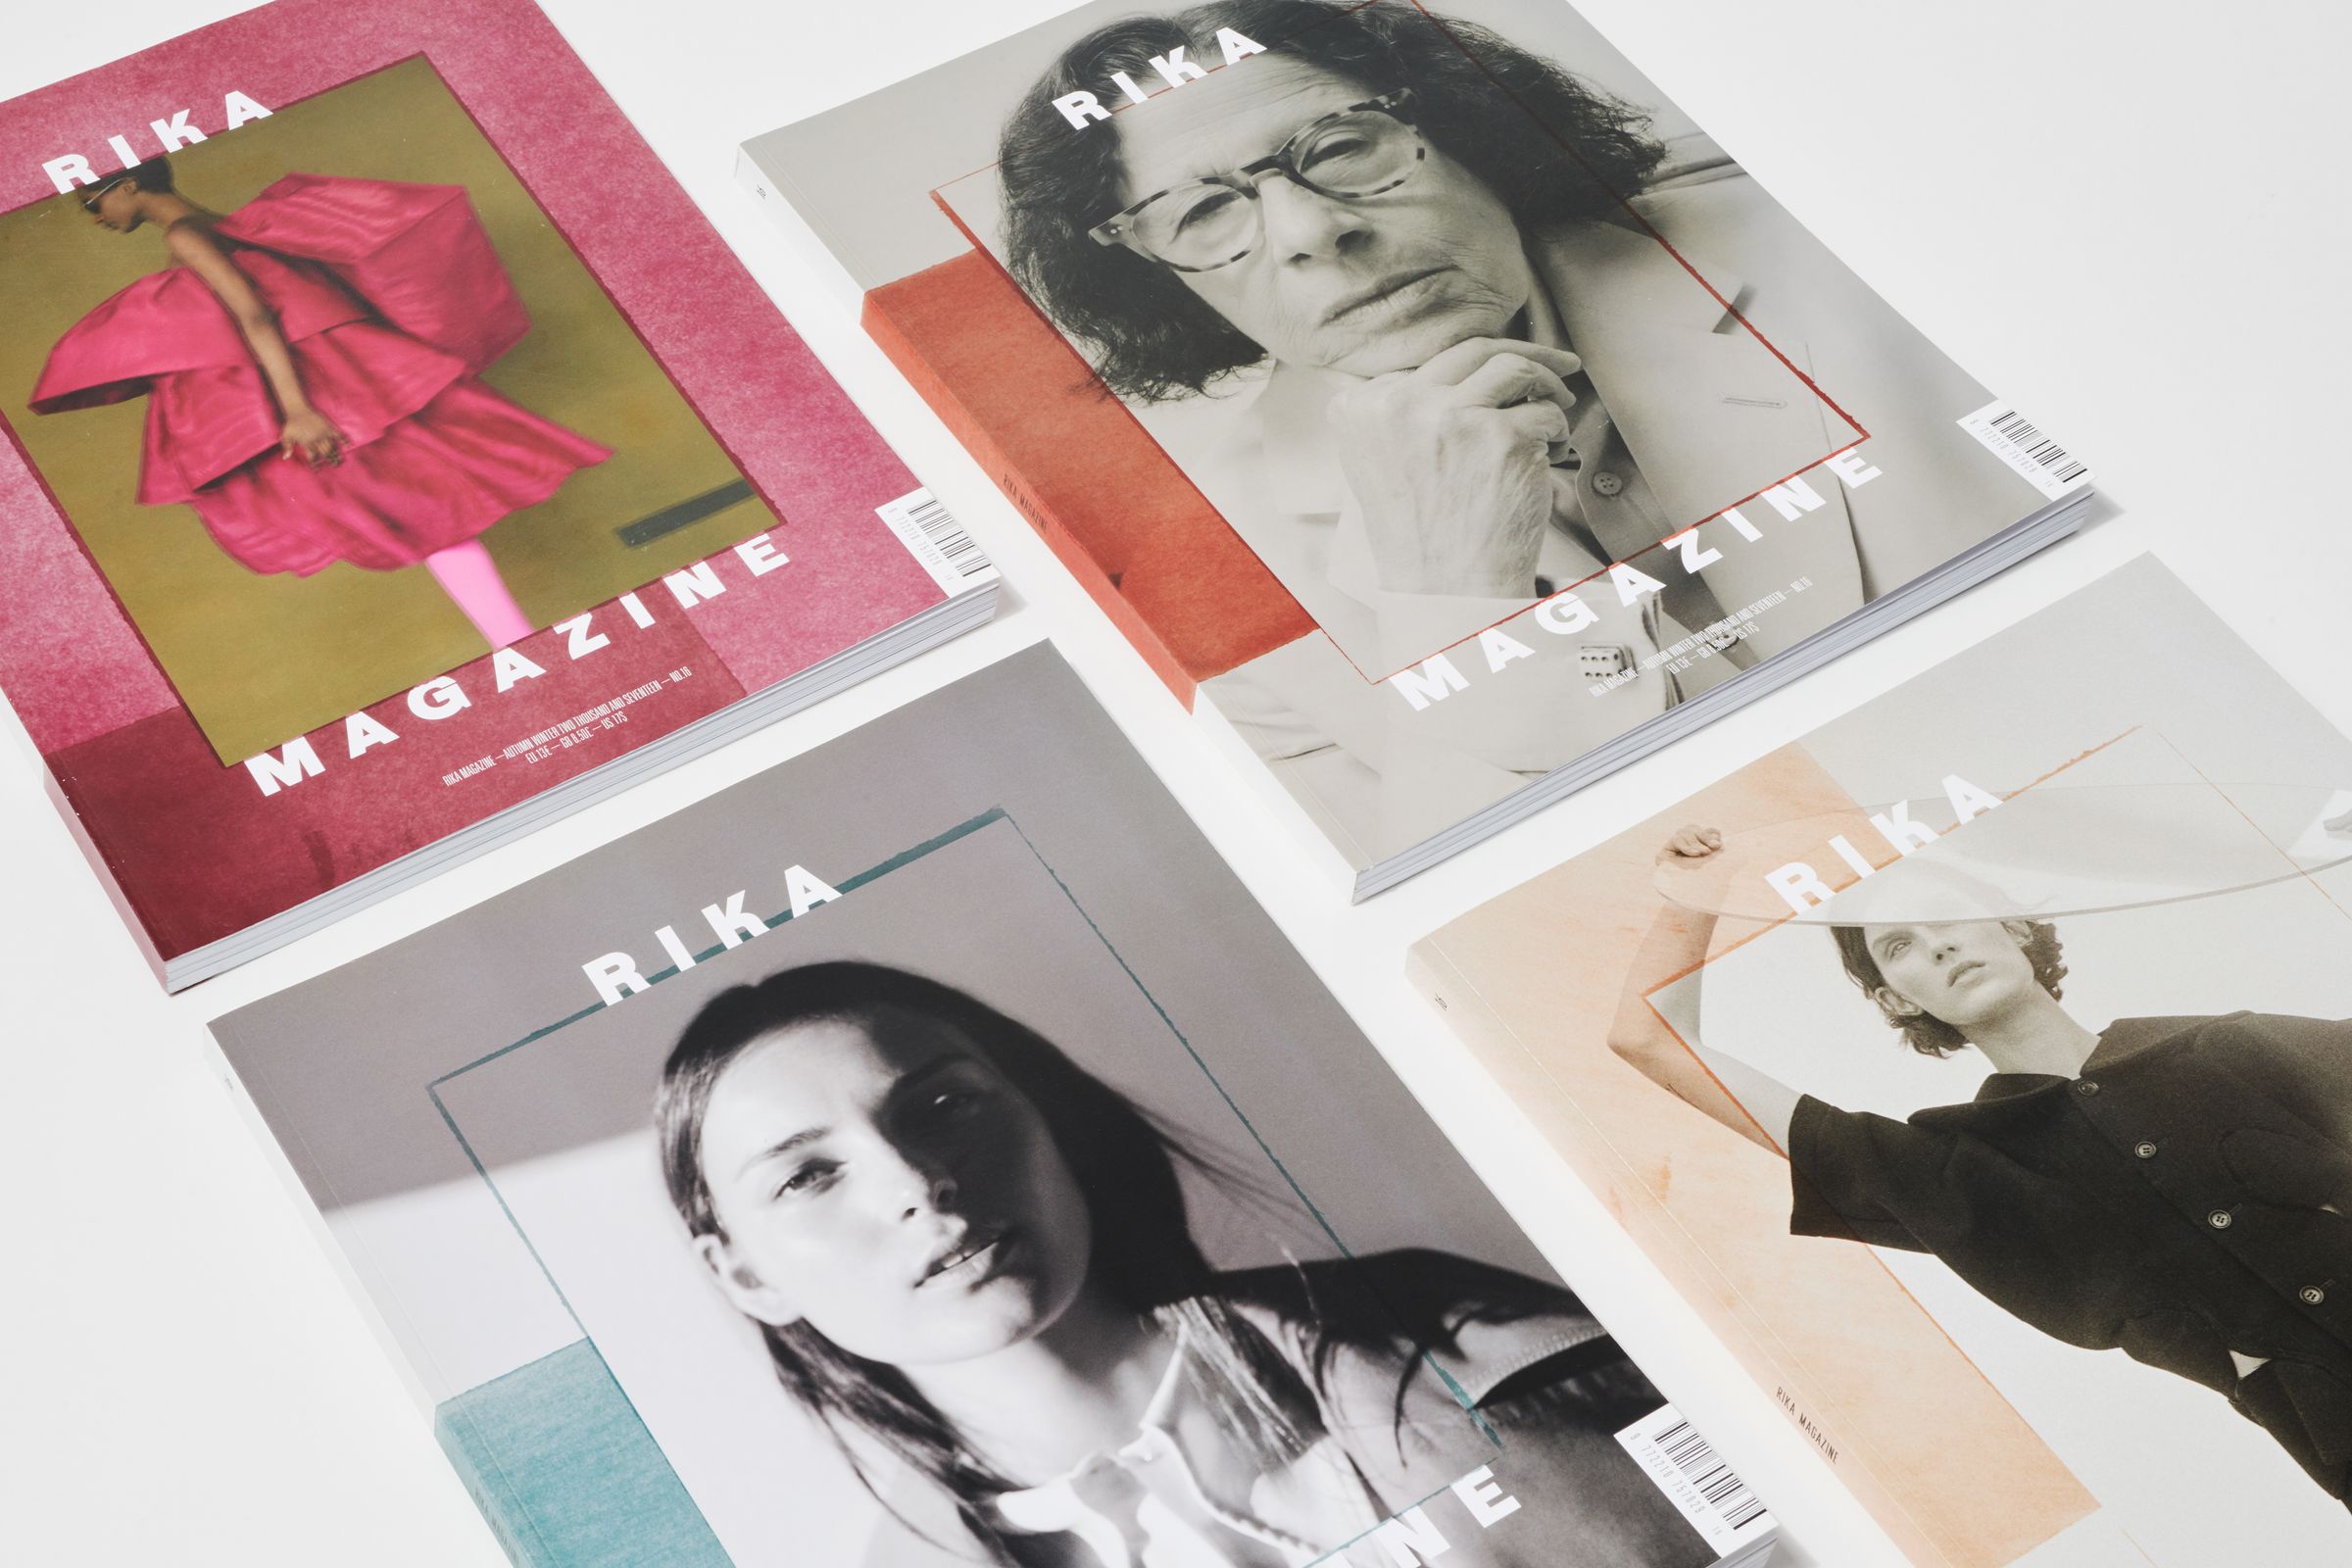 Rika Magazine issue no. 16 covers